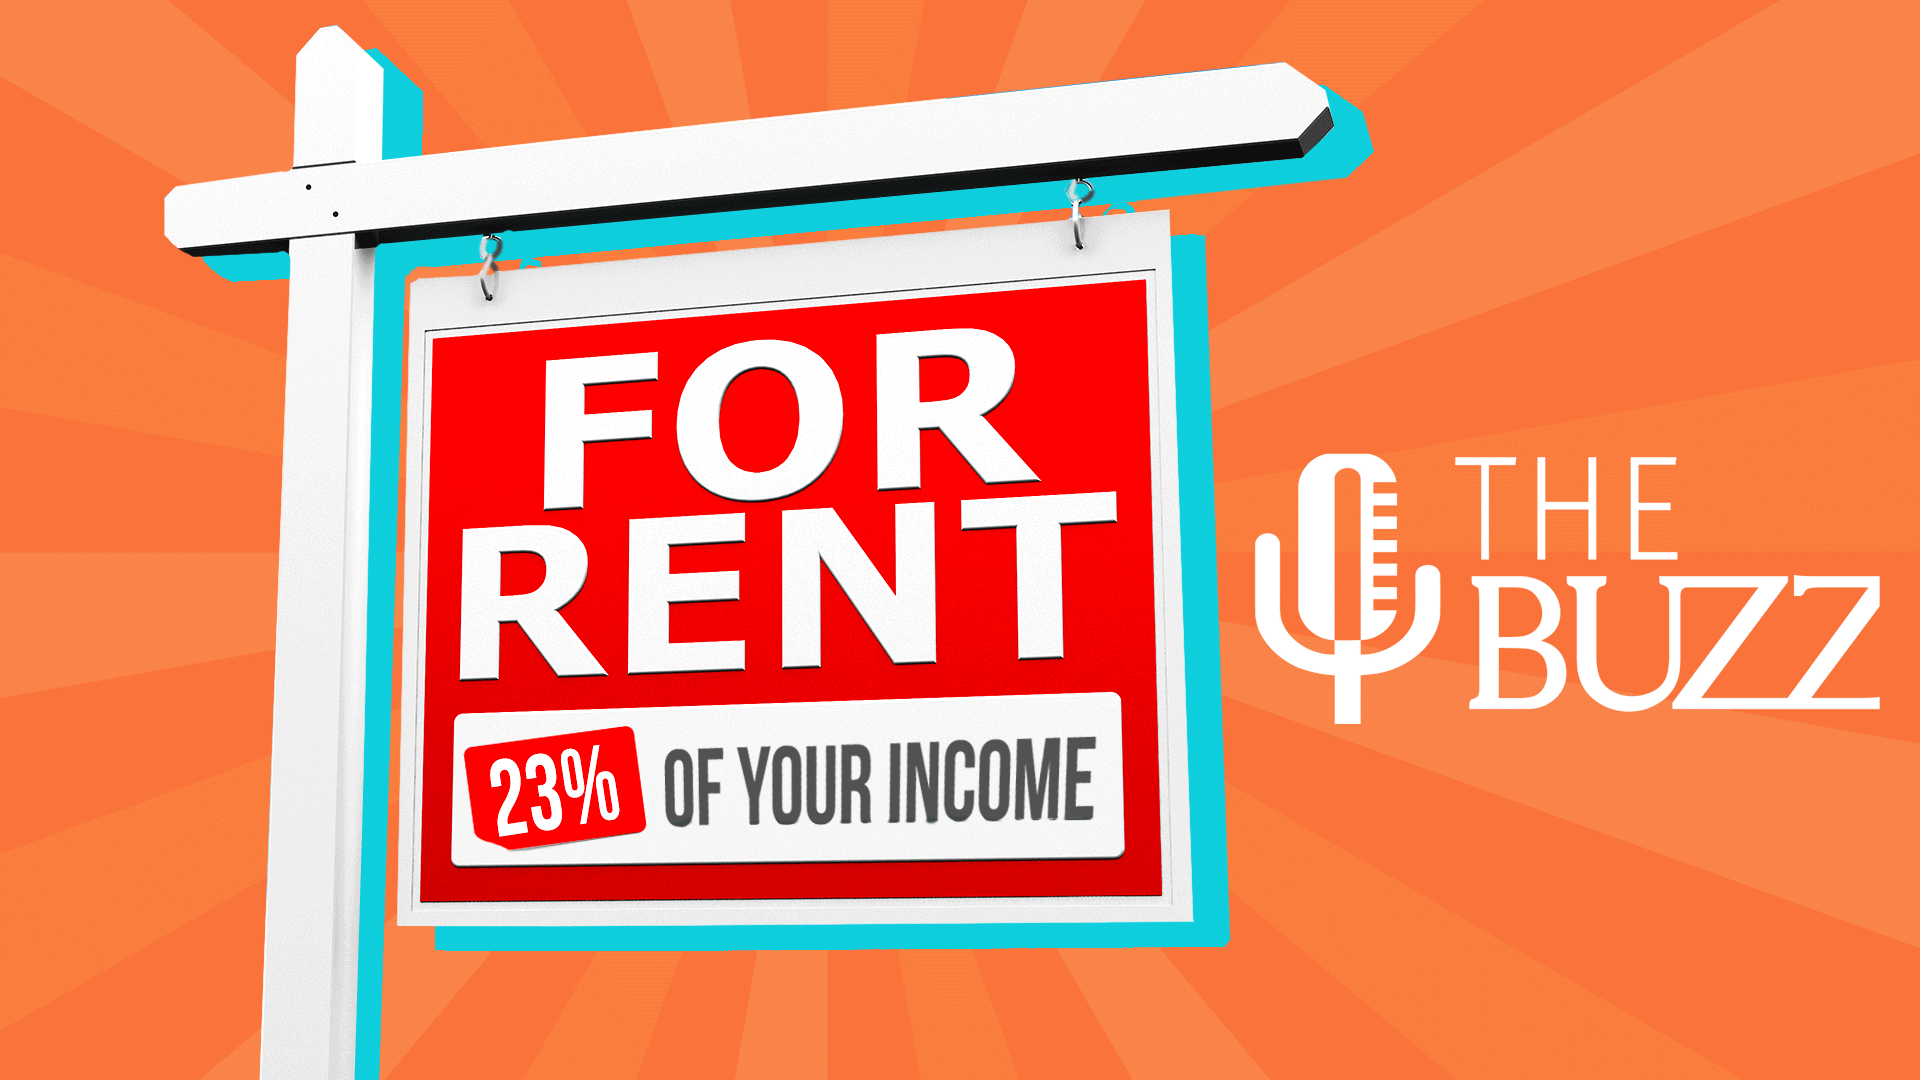 Median rental costs in Southern Arizona have almost doubled since 2005. The Buzz examines the rental market and how it's affecting Arizonans.